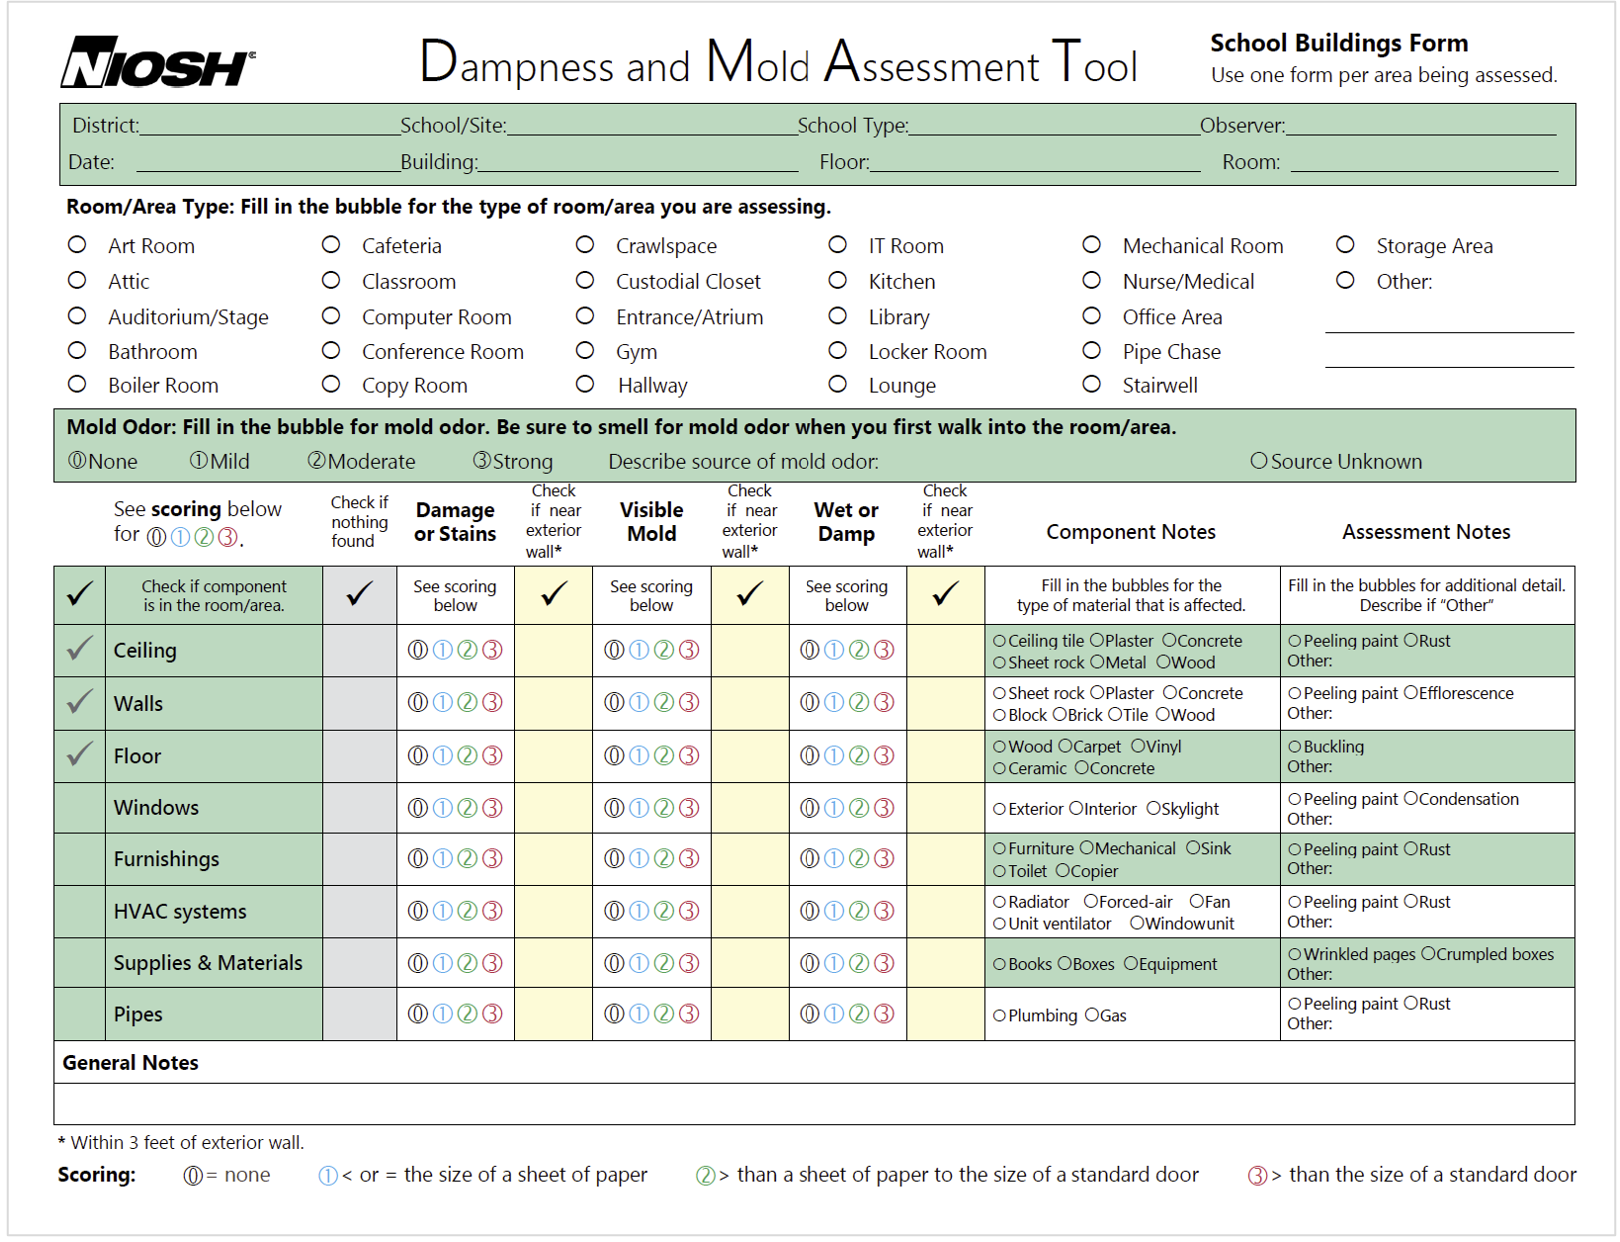 Dampness and Mold Assessment Tool 